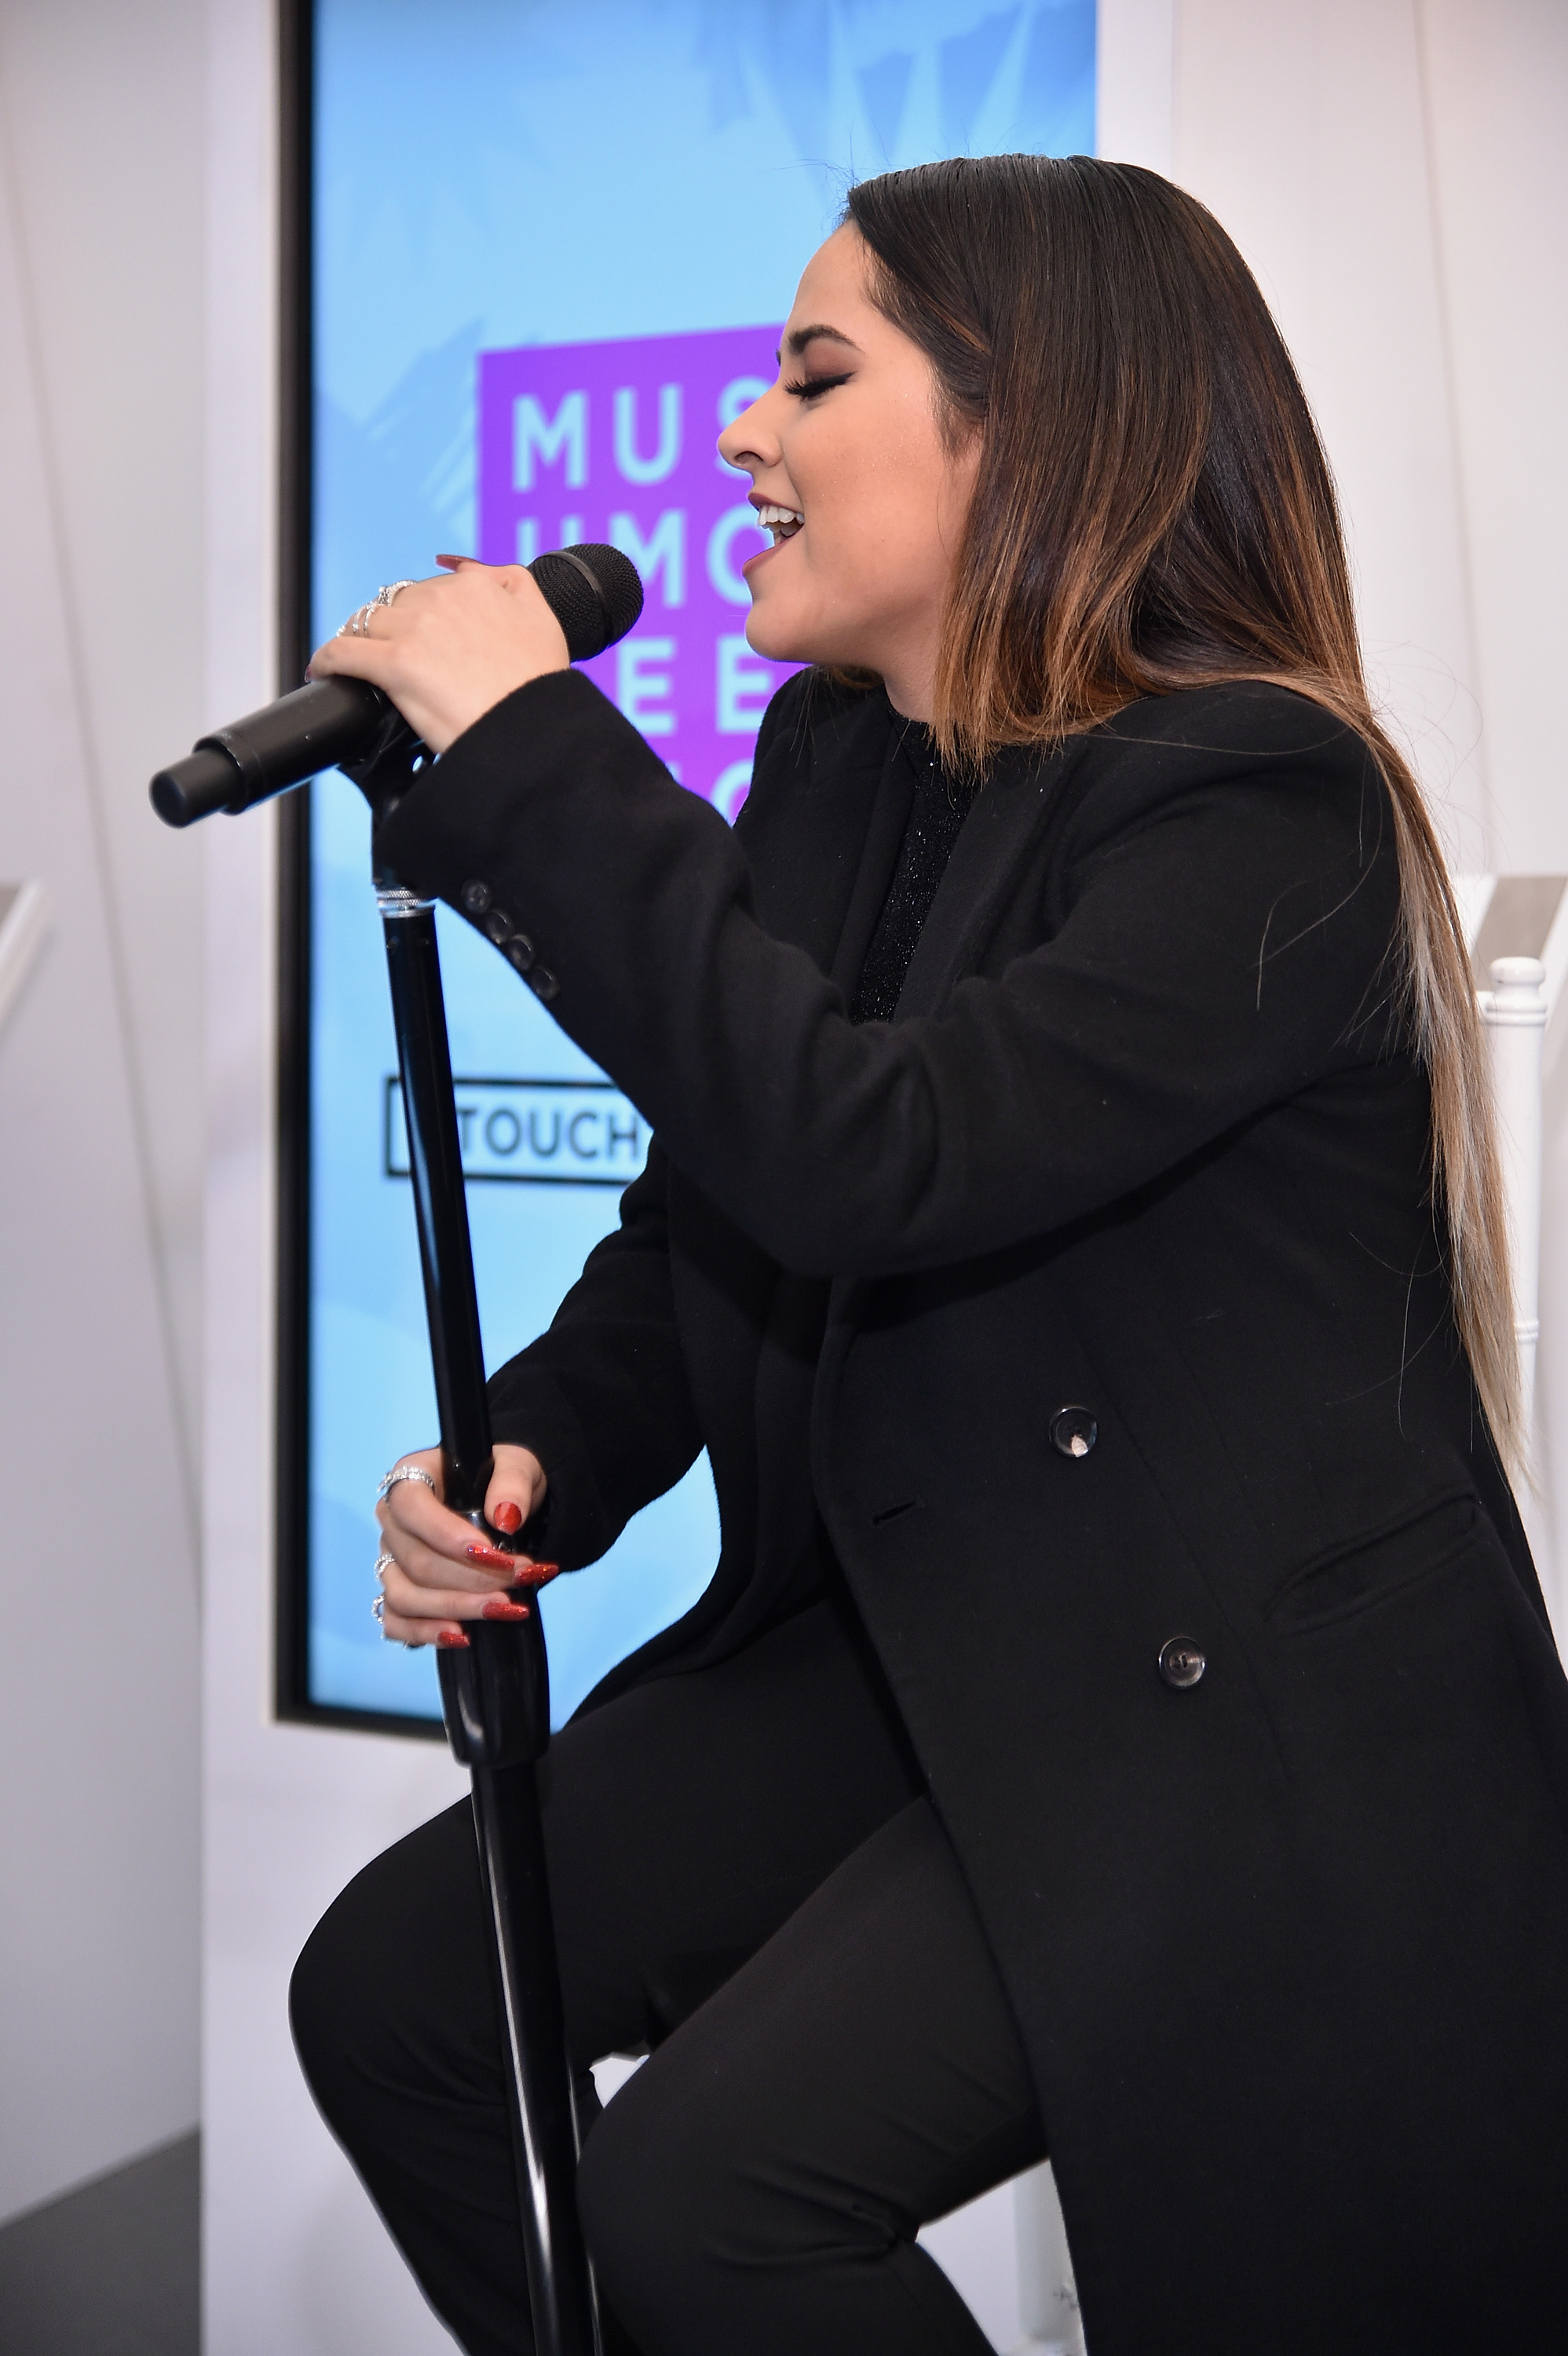 Becky G performs at the launch party of The Museum of Feelings, curated by Glade, at Brookfield Place in New York City on Nov. 23, 2015. (Mike Coppola—Getty Images for Glade)